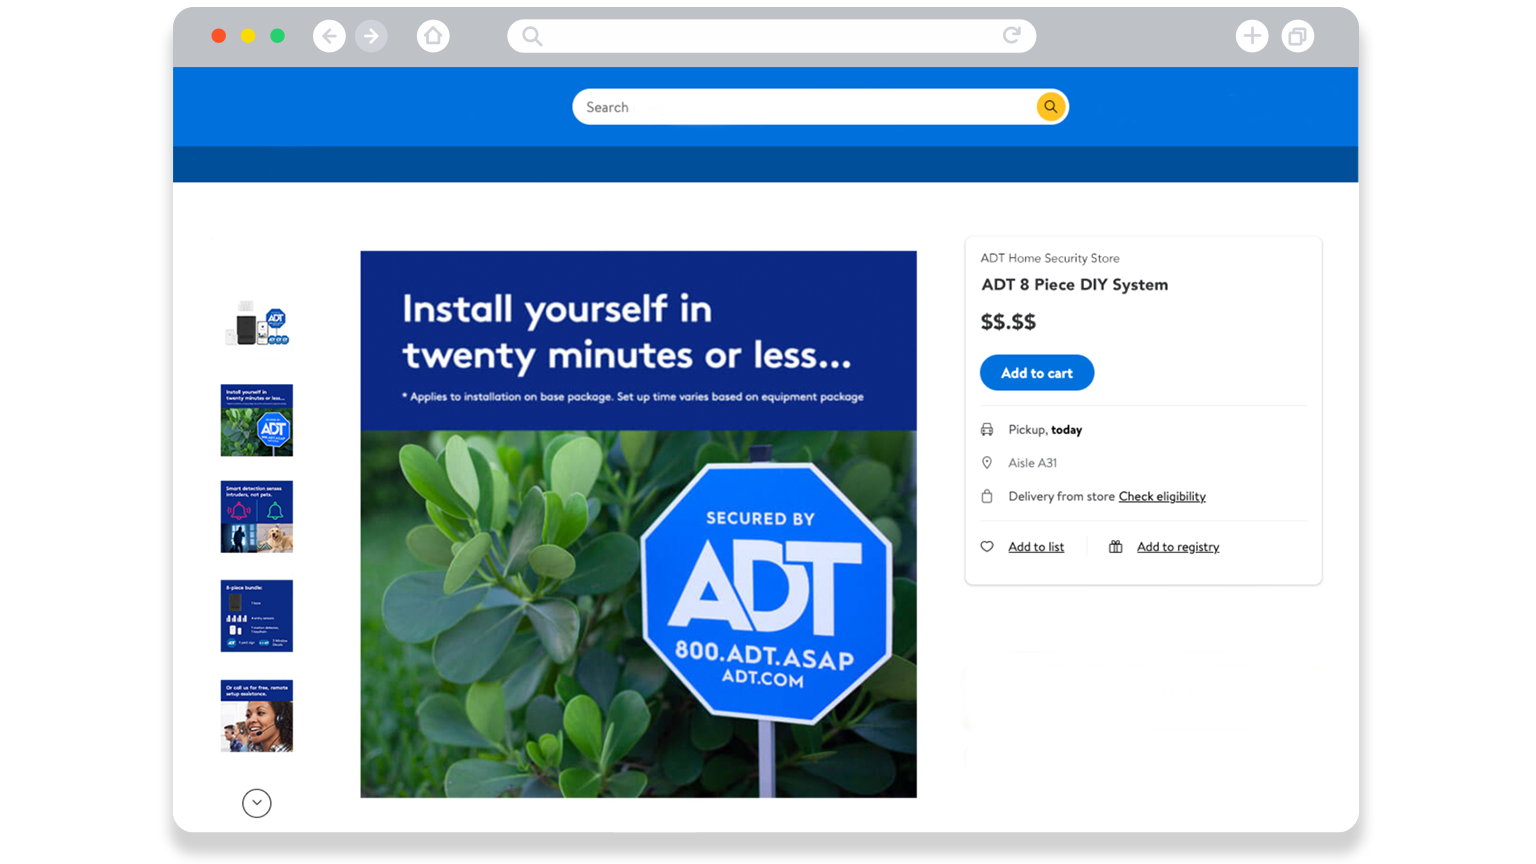 Sample ecommerce page for ADT security